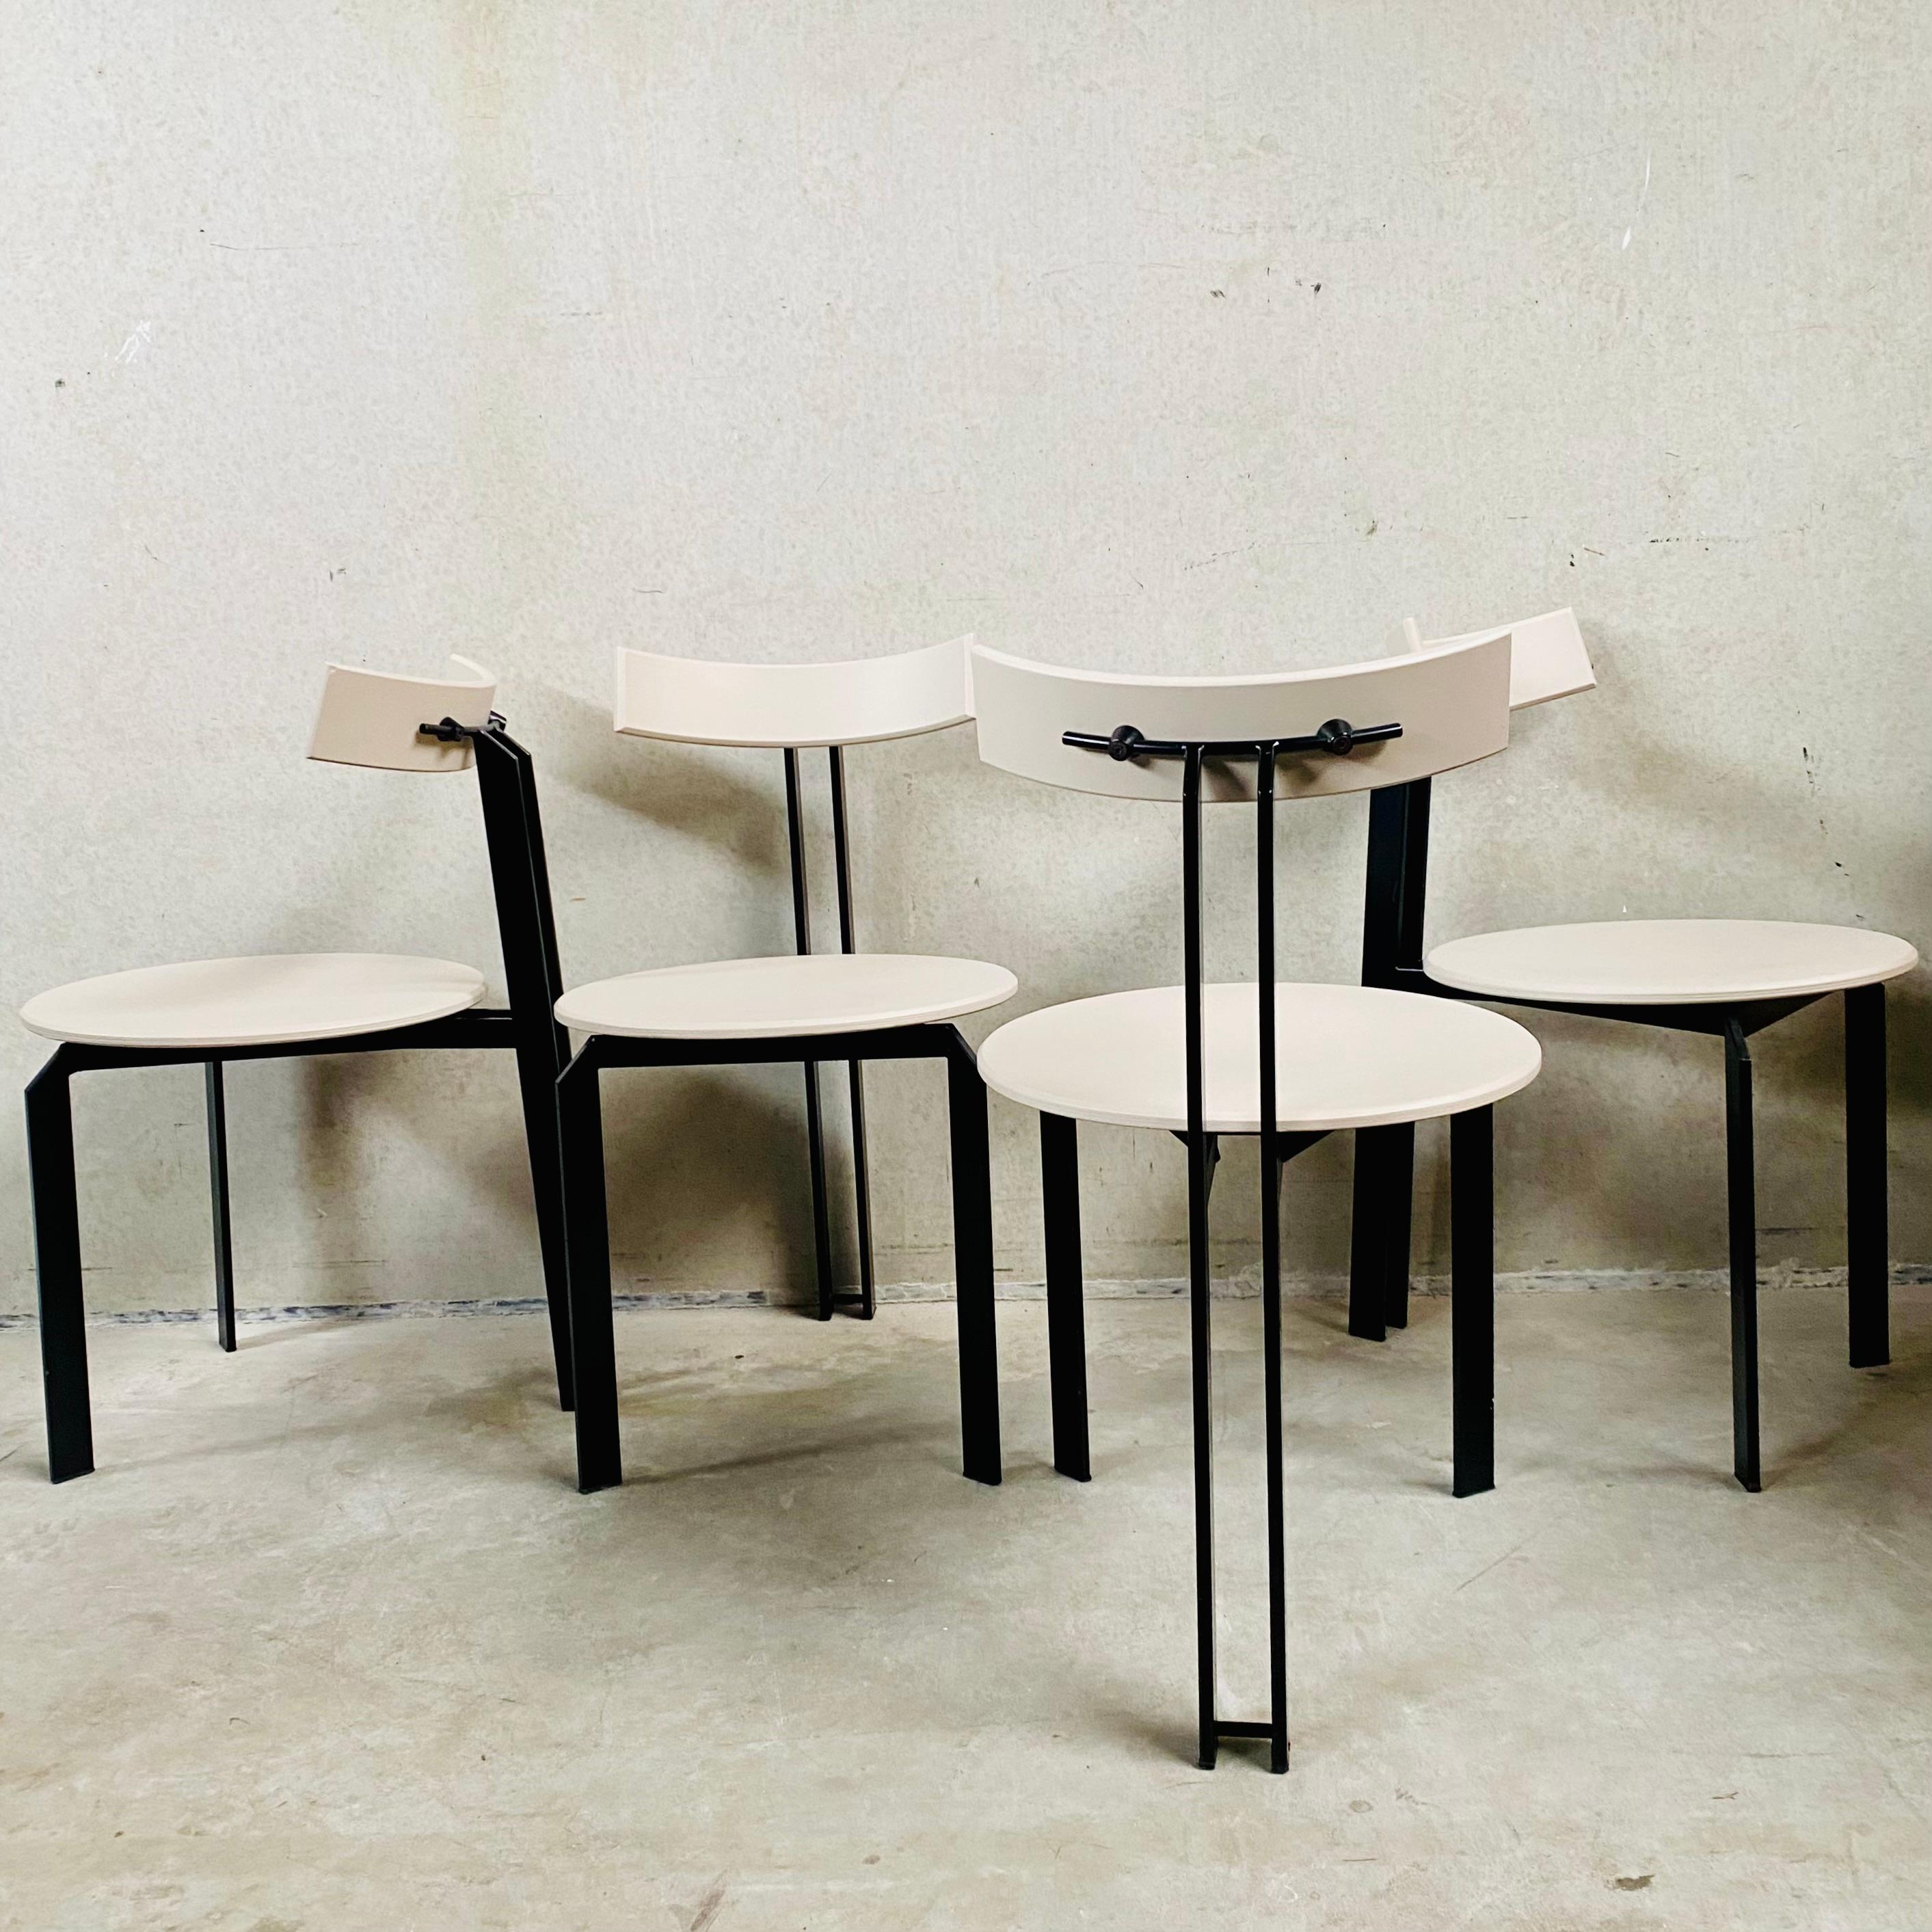 4 x Brutalist ZETA Dining Chairs by Martin Haksteen for Harvink, Netherlands  For Sale 5